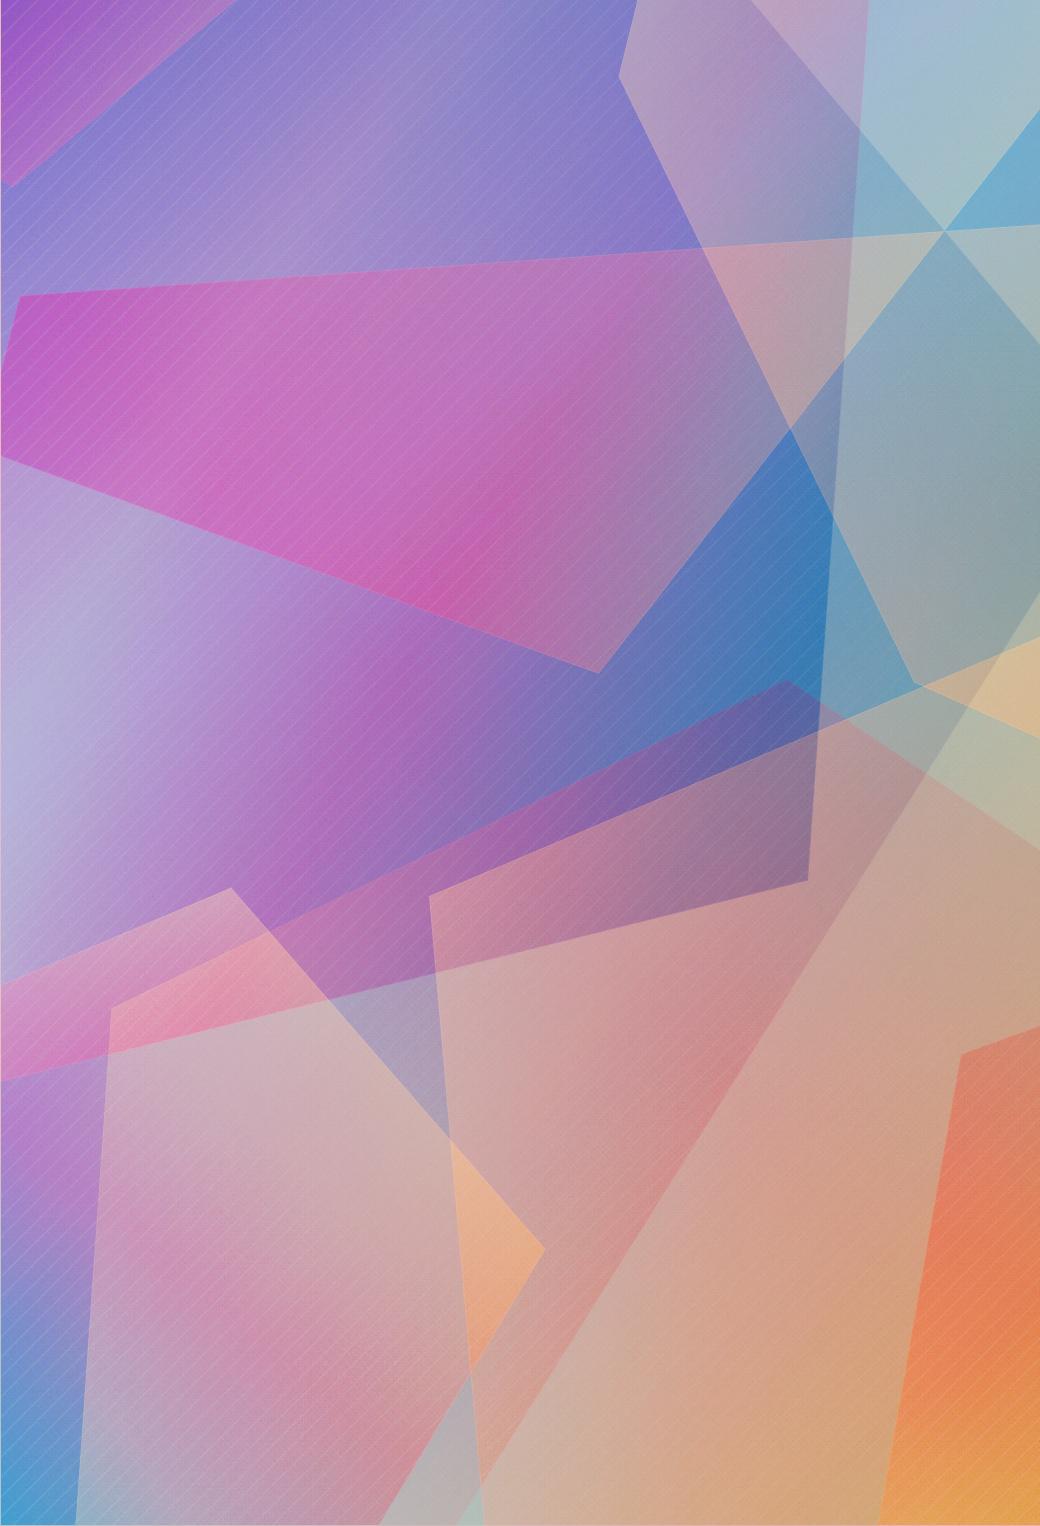 20 Parallax Ios 7 Wallpapers For Iphone Ready To Download - Wallpaper -  1040x1526 Wallpaper 